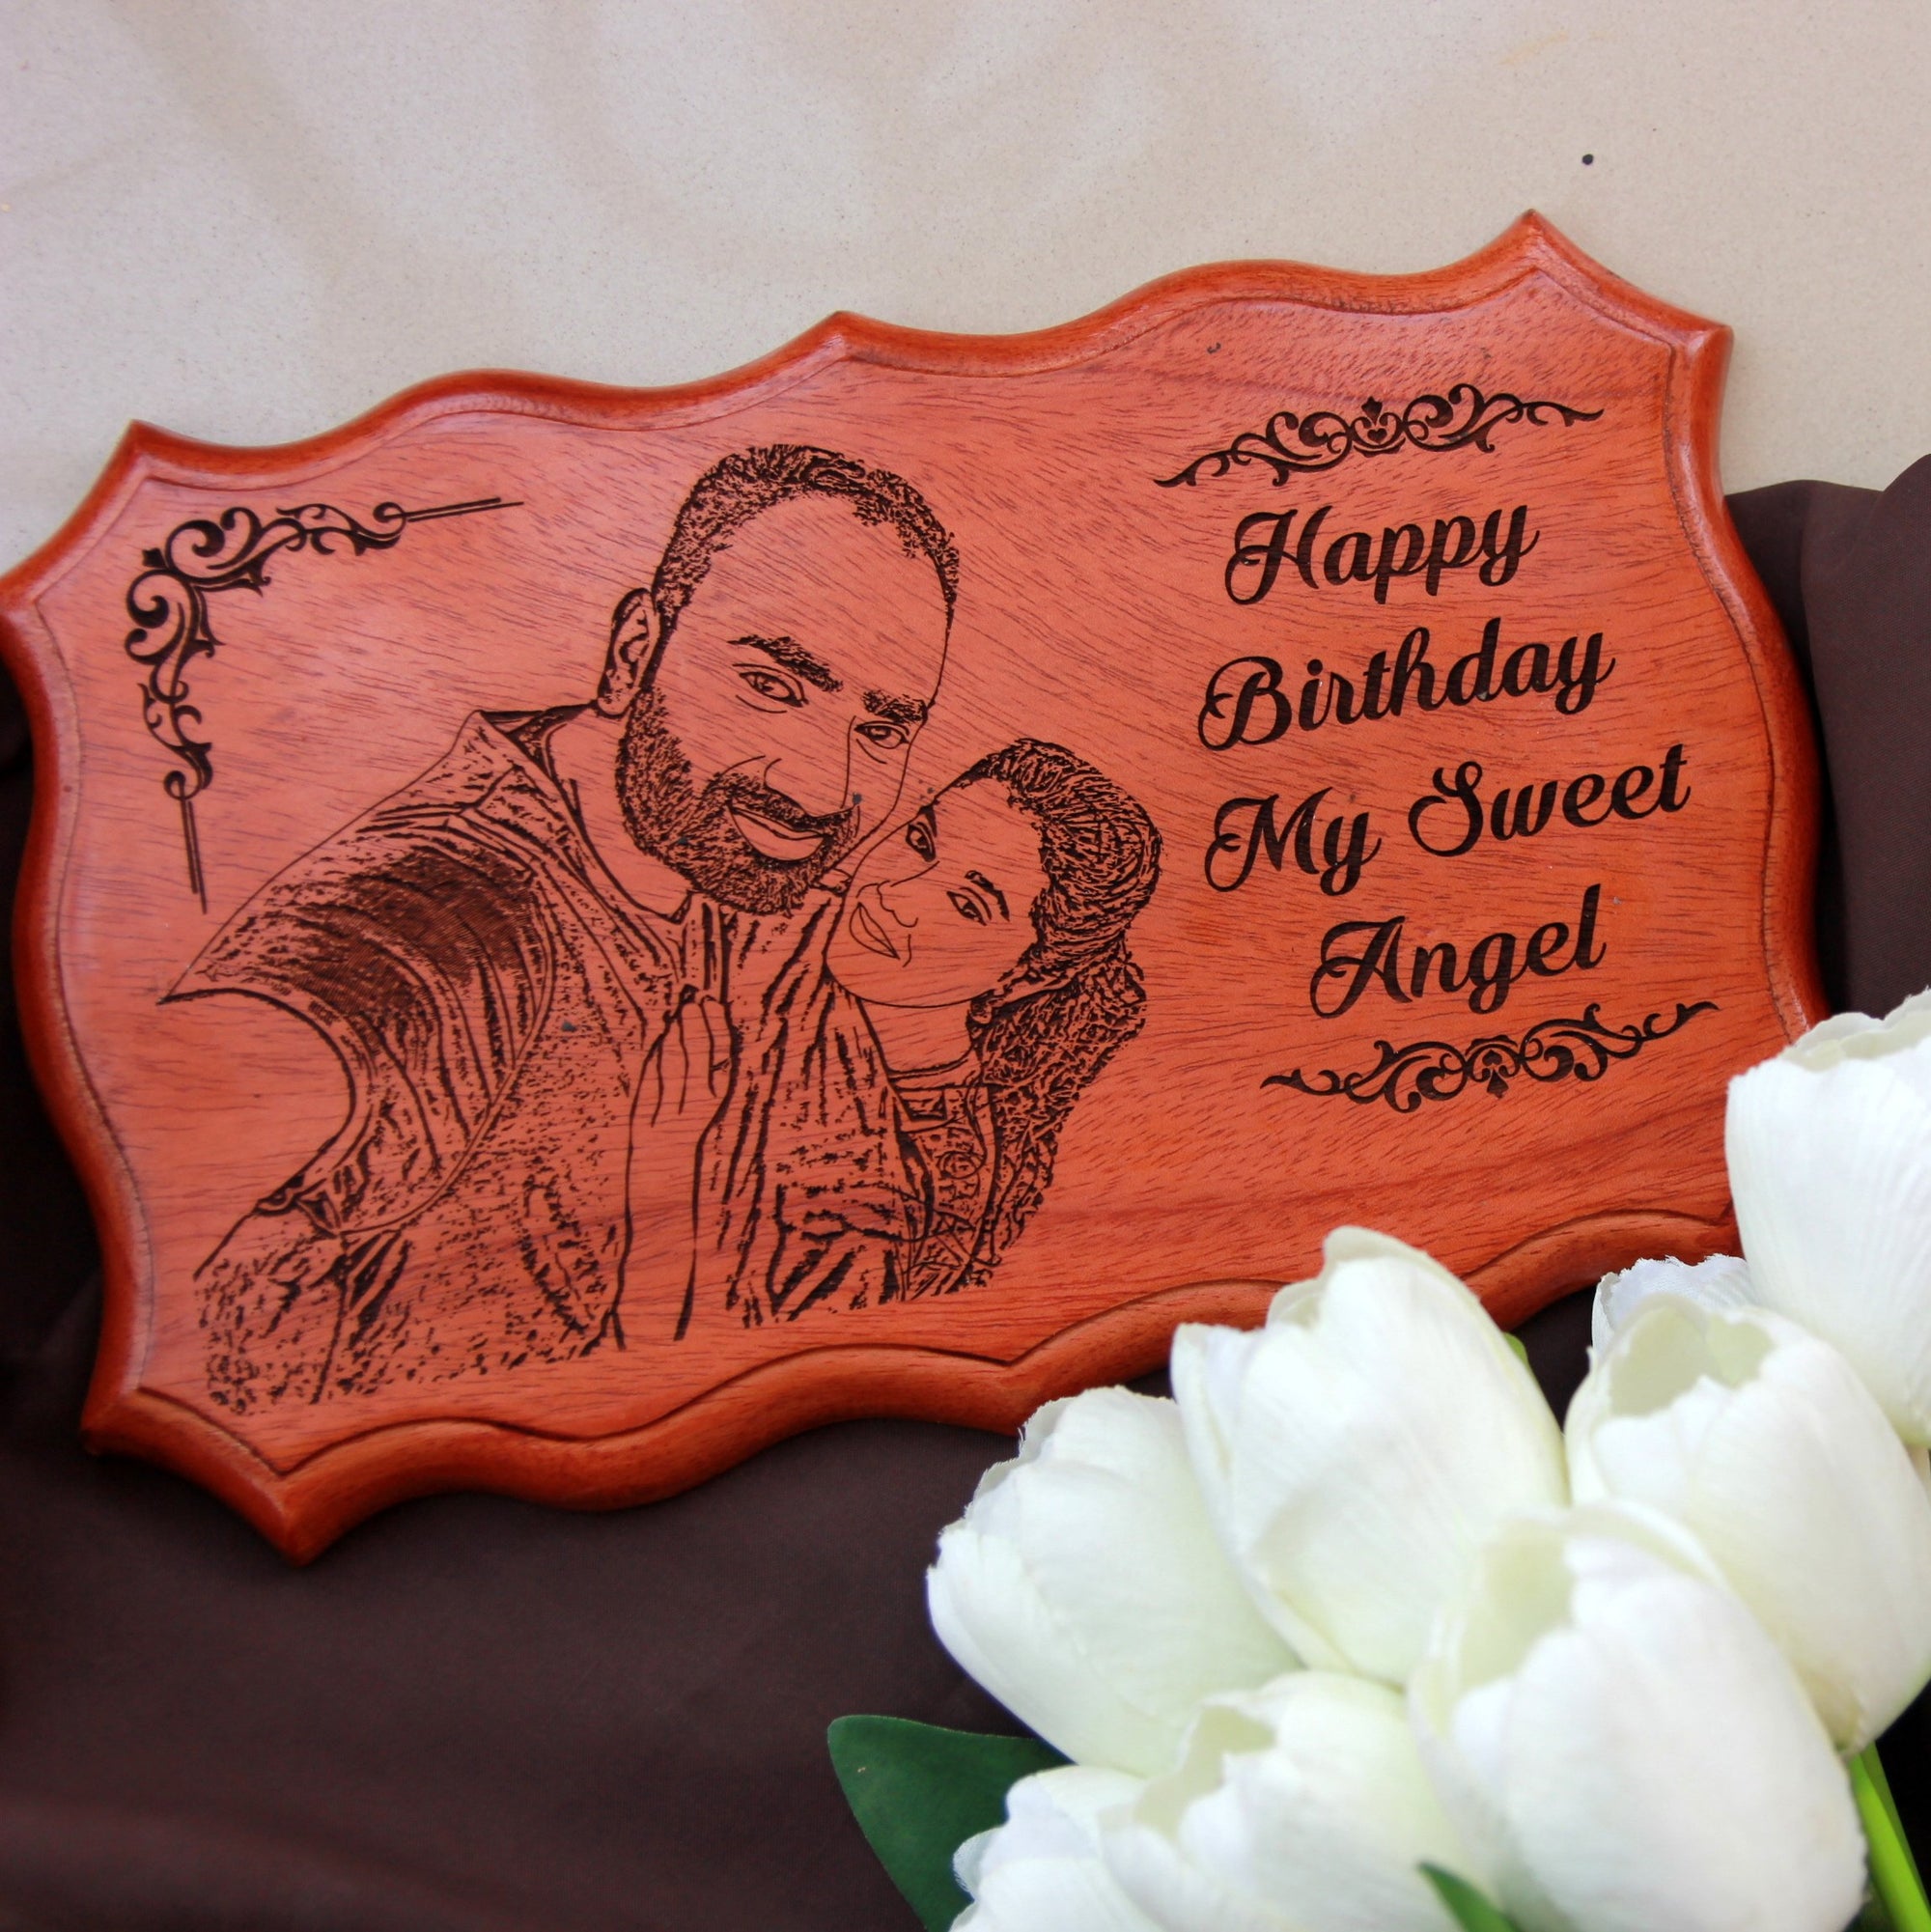 Customize A Wood Sign With Photo And Birthday Wishes As Gift For Girlfriend or Wife. Buy Birthday Gifts Online.